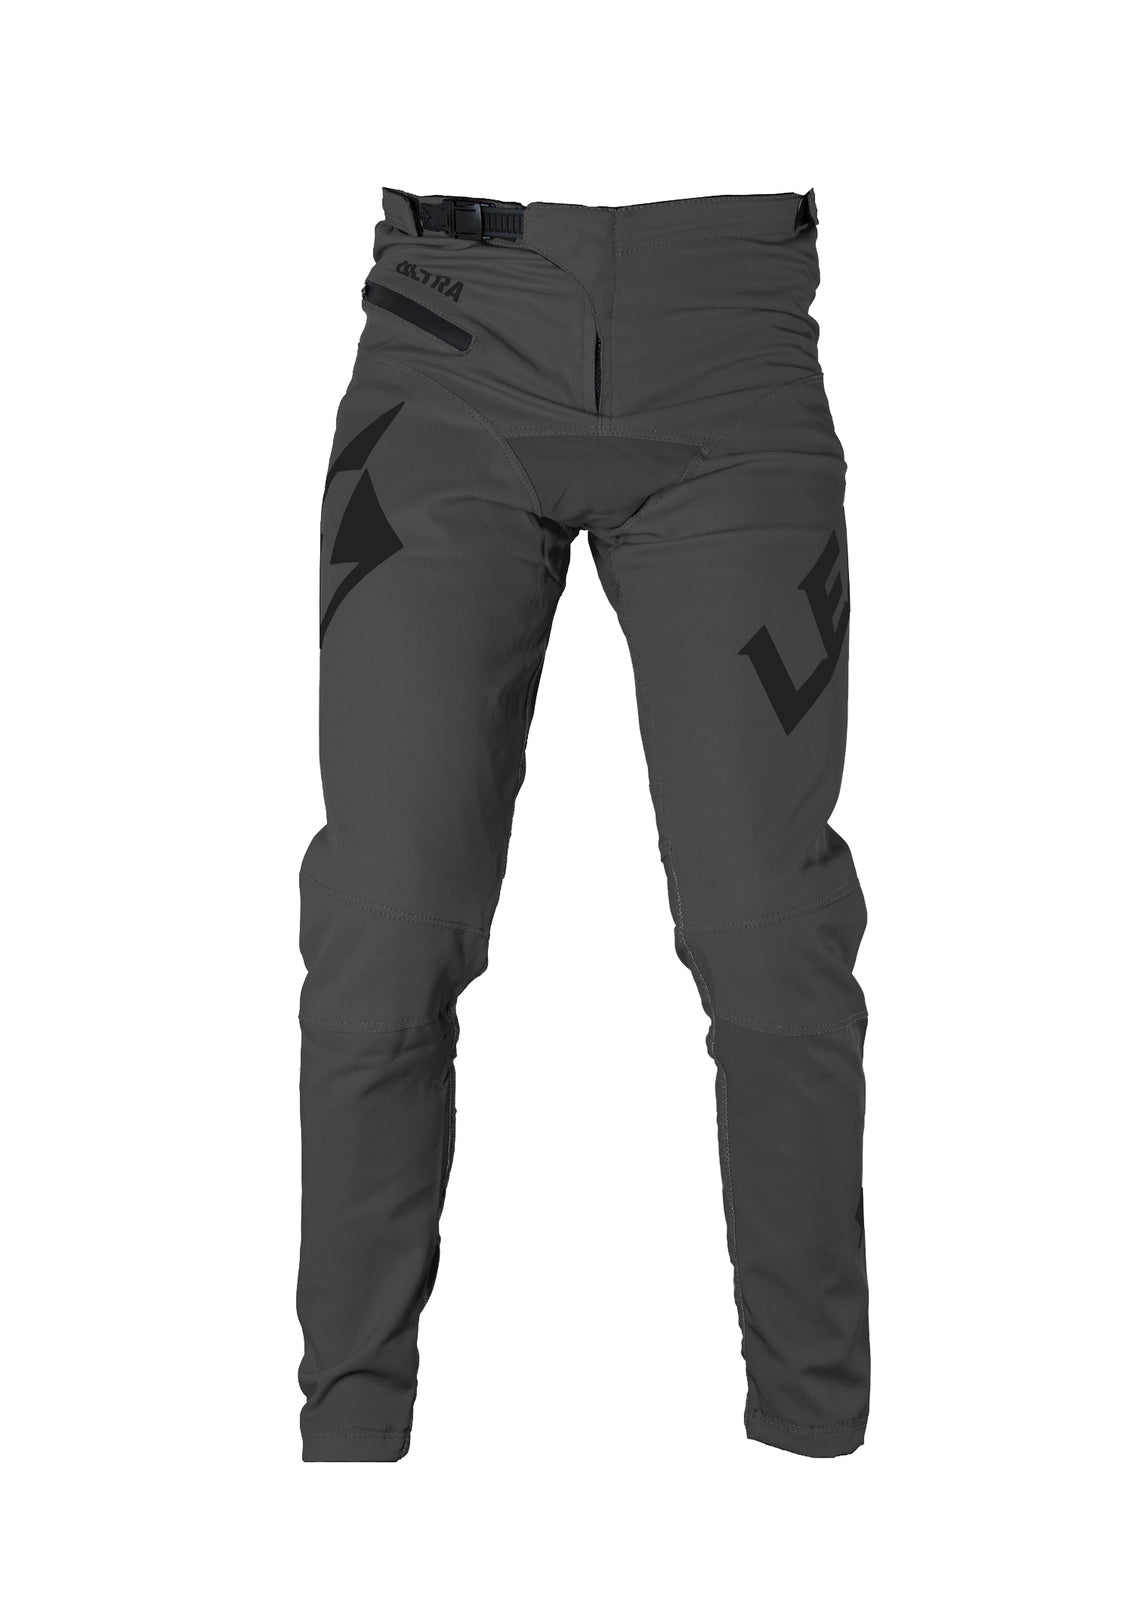 A pair of grey Lead Ultra Youth Pants with a black logo on them.